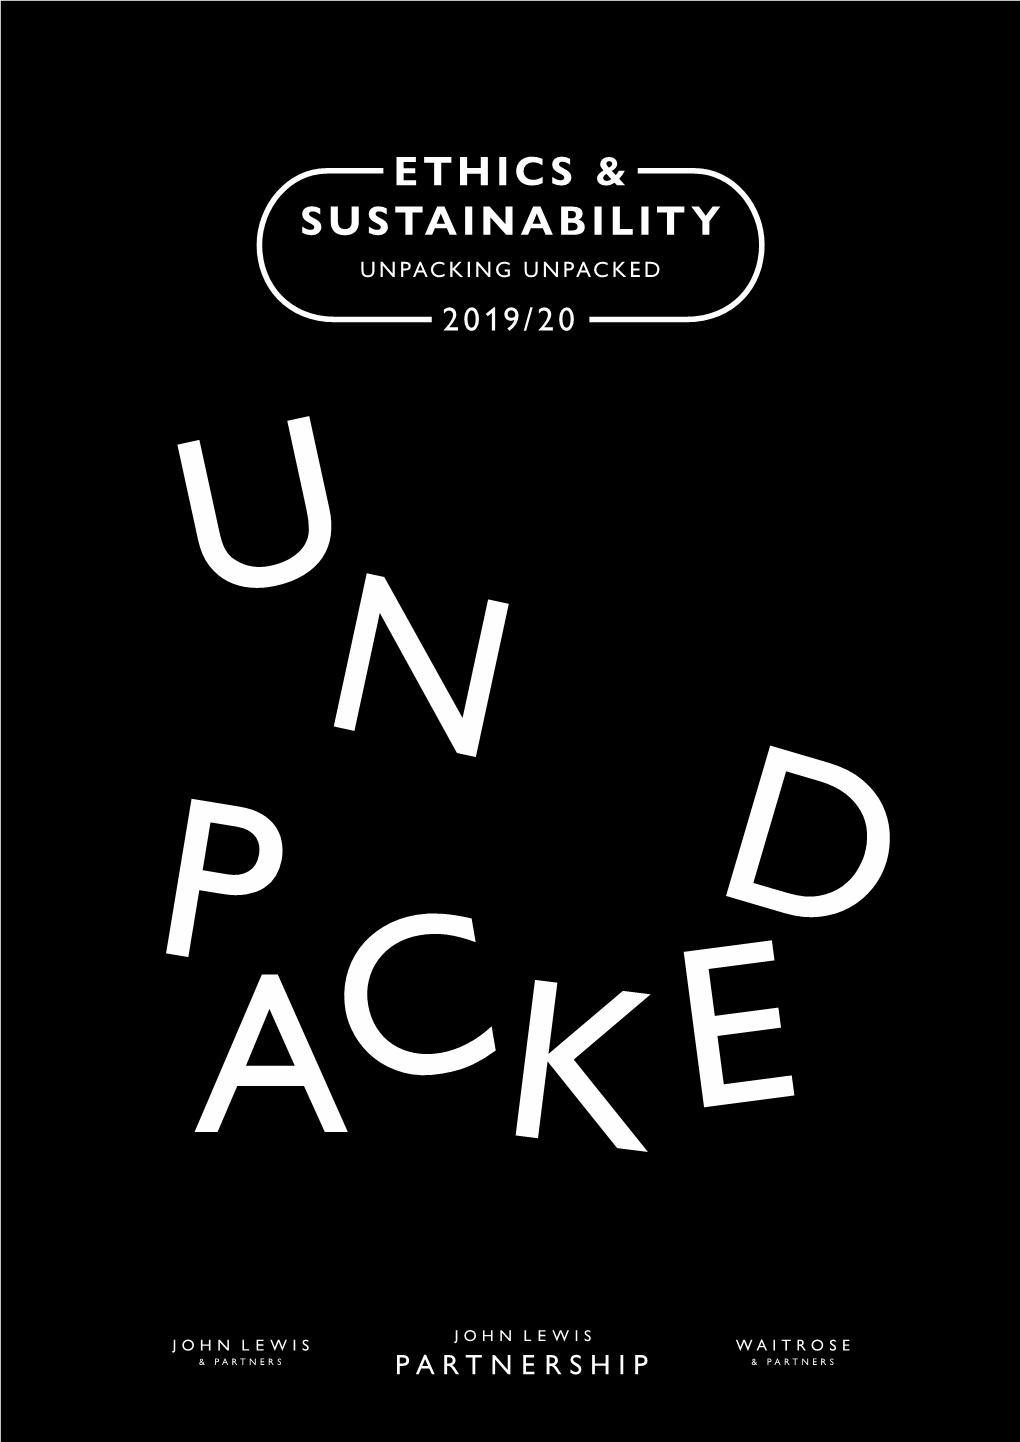 Unpacked Report 2019/20 3 Summary Introduction What Is Unpacked? Customer Thoughts Customer Behaviour Environmental Findings Success Factors What's Next?